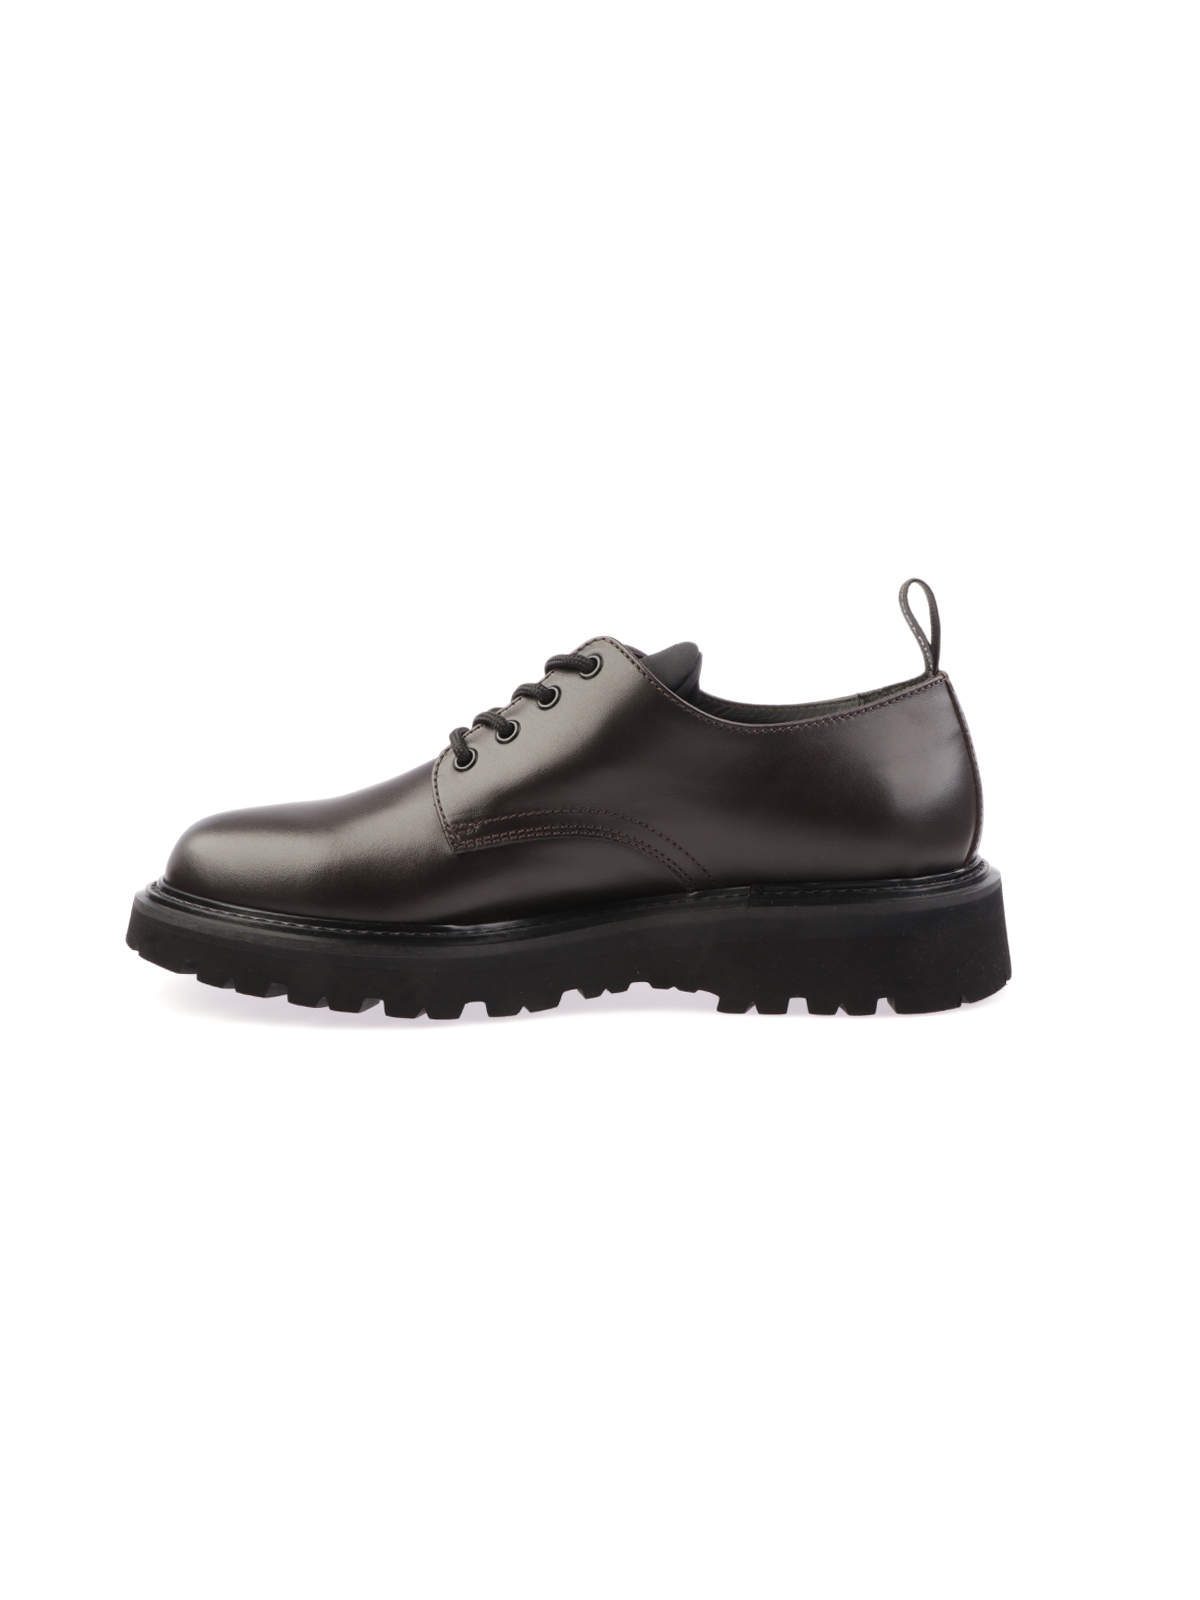 Picture of WOOLRICH | Men's New City Calf Shoes